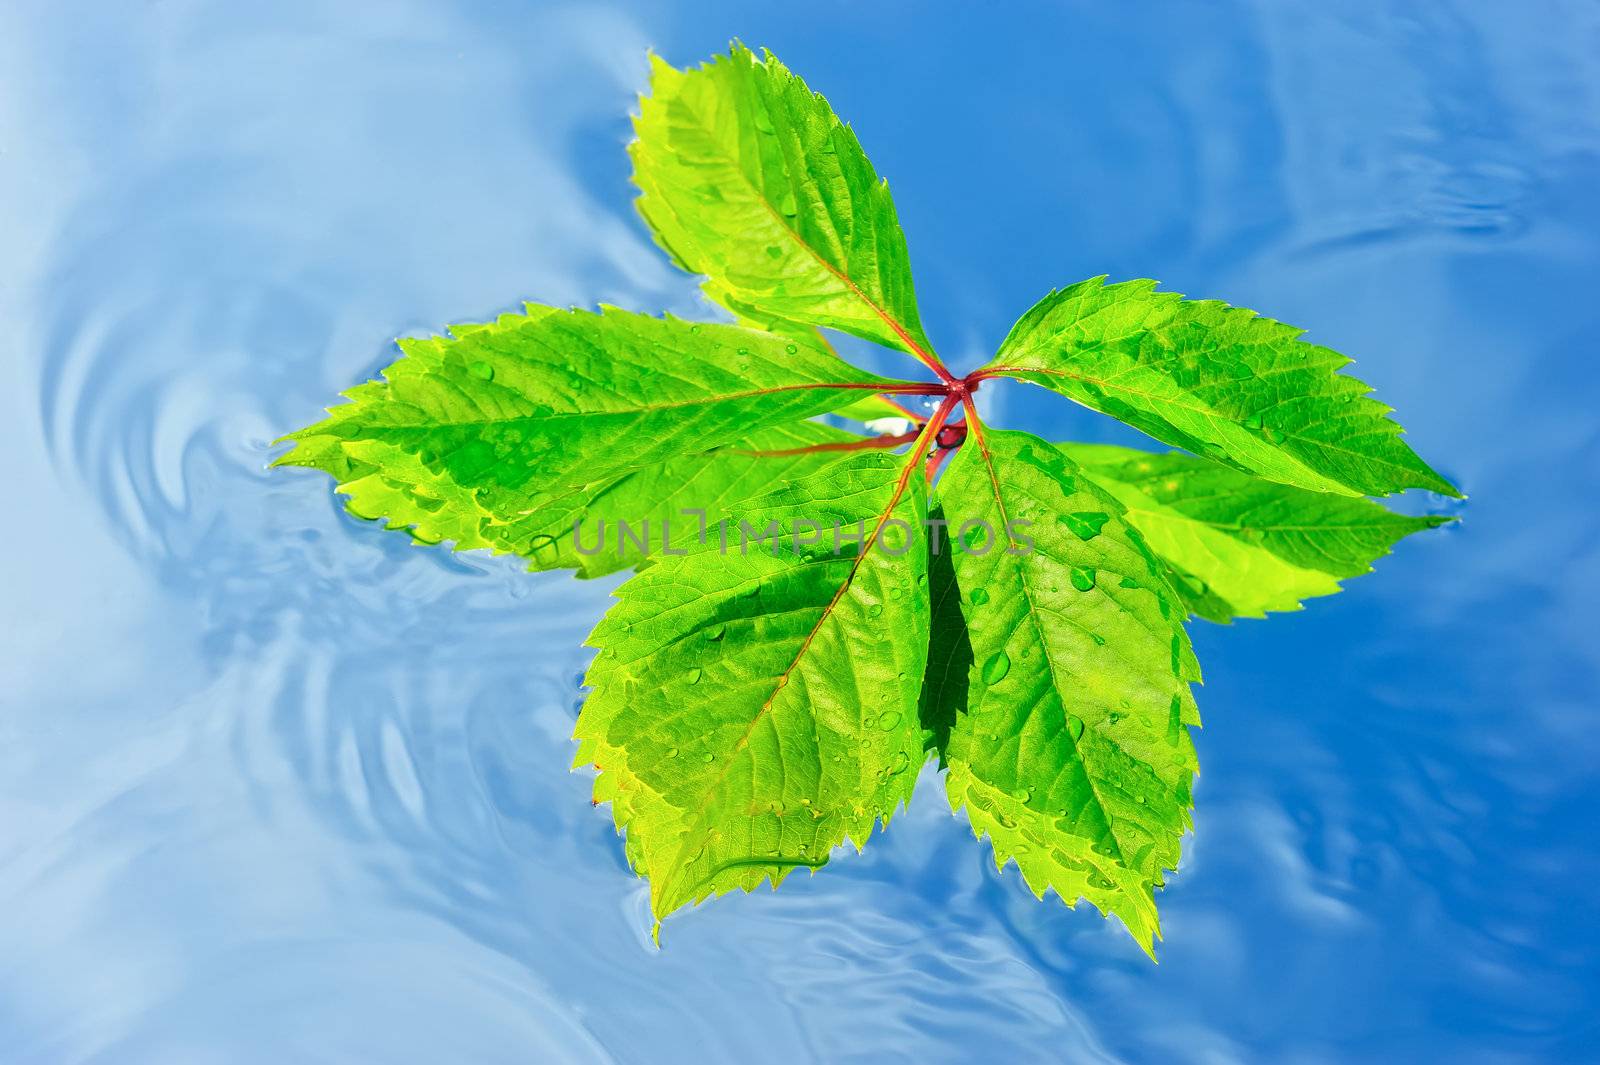 Green leaf on the surface of pure water